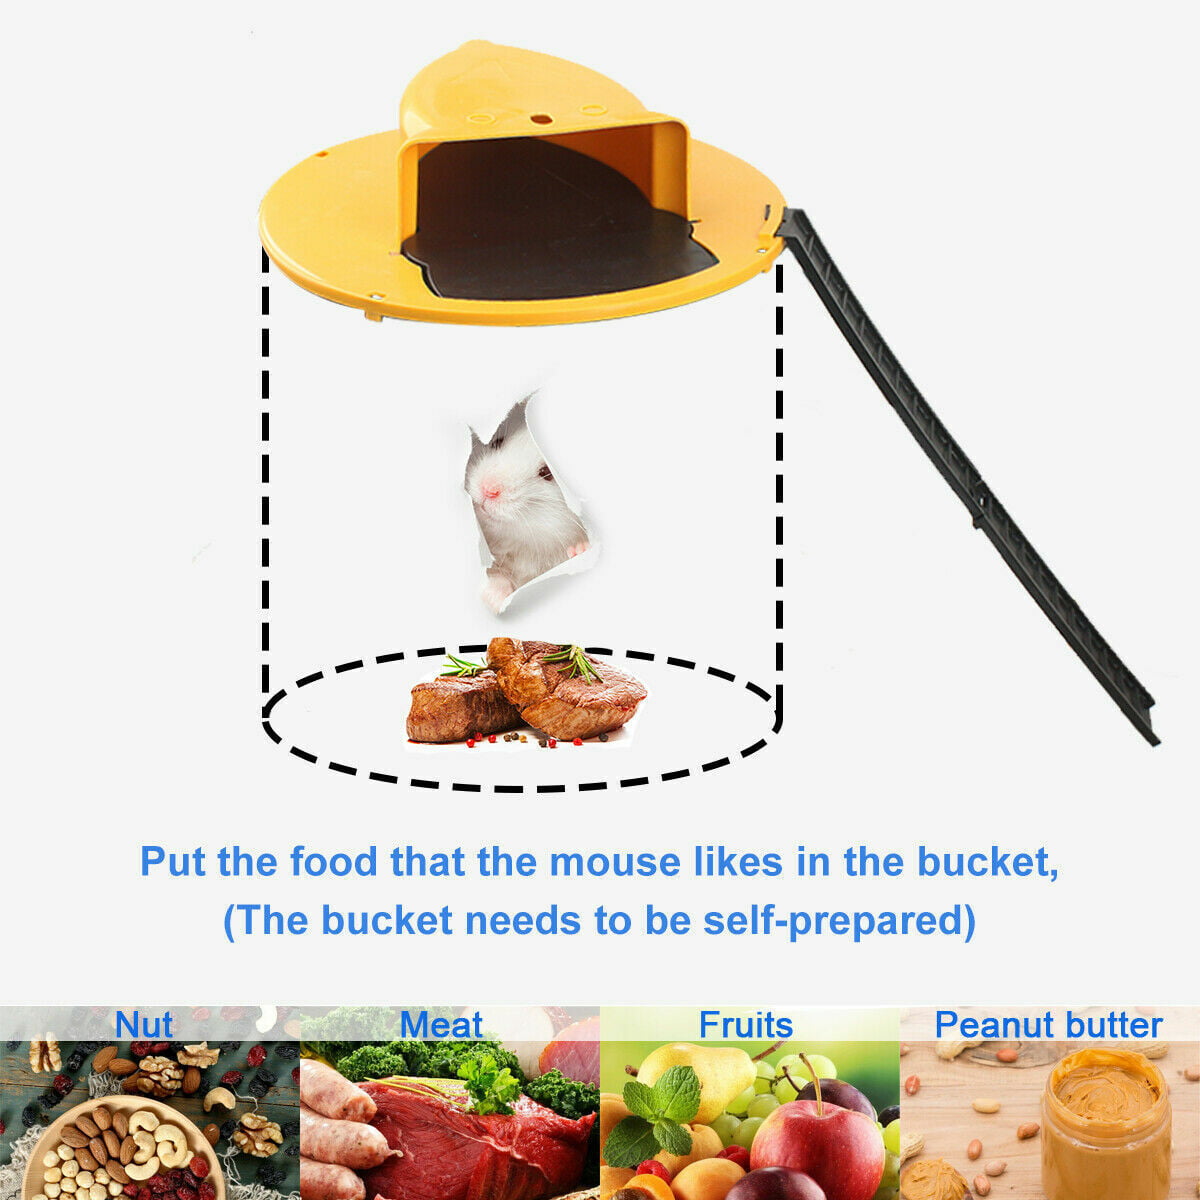 How to Build a Bucket Mousetrap - The Budget Diet